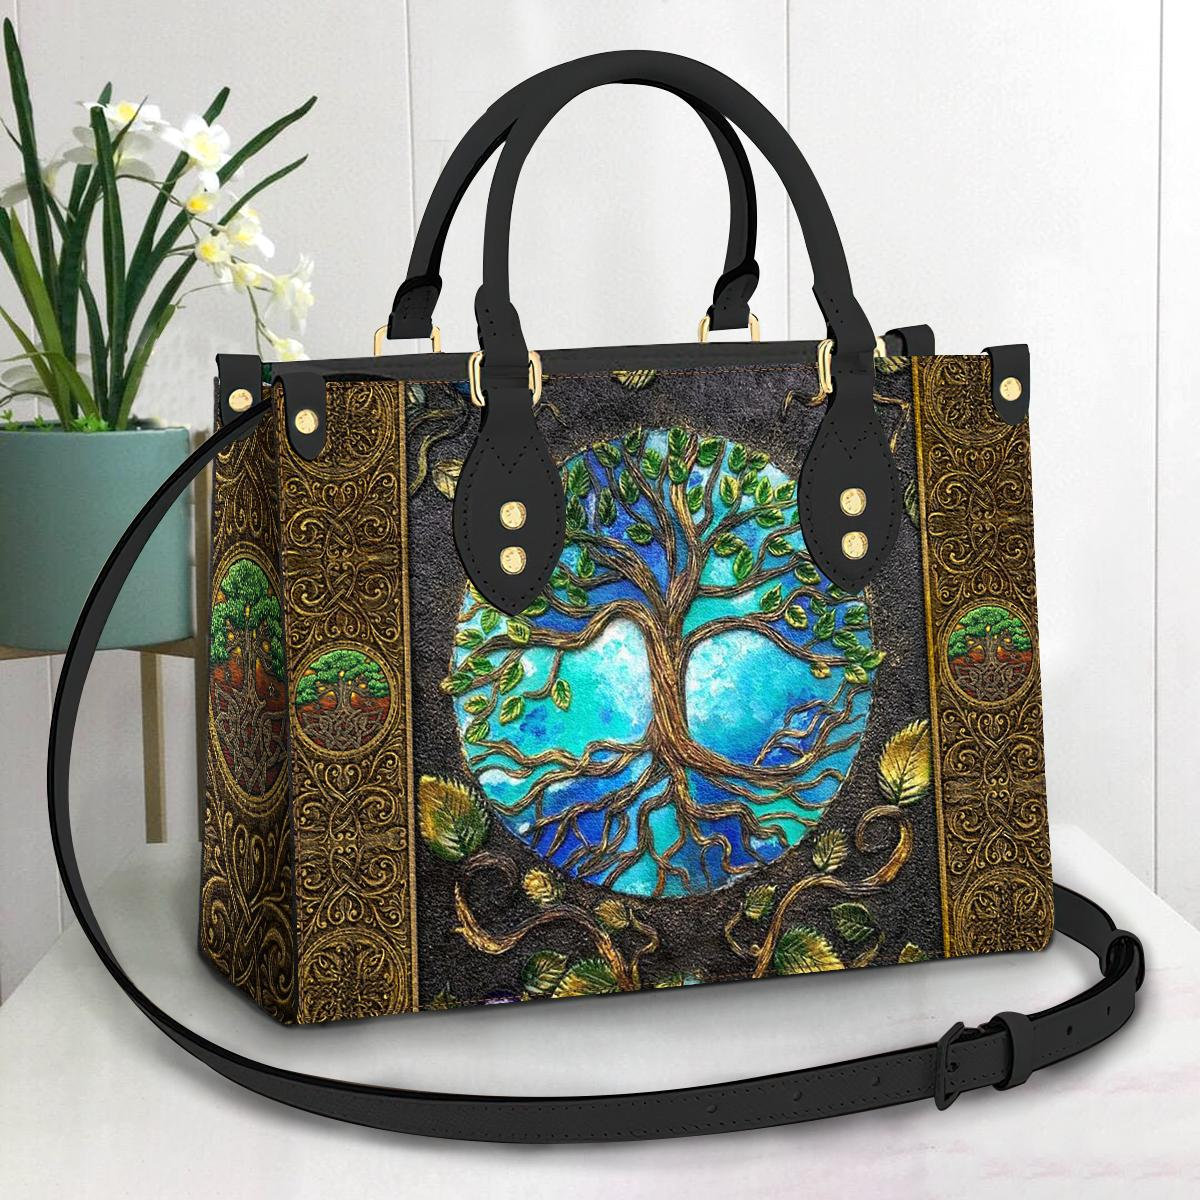 Tree of Life, Bags, Soft Leather Tree Of Life Purse